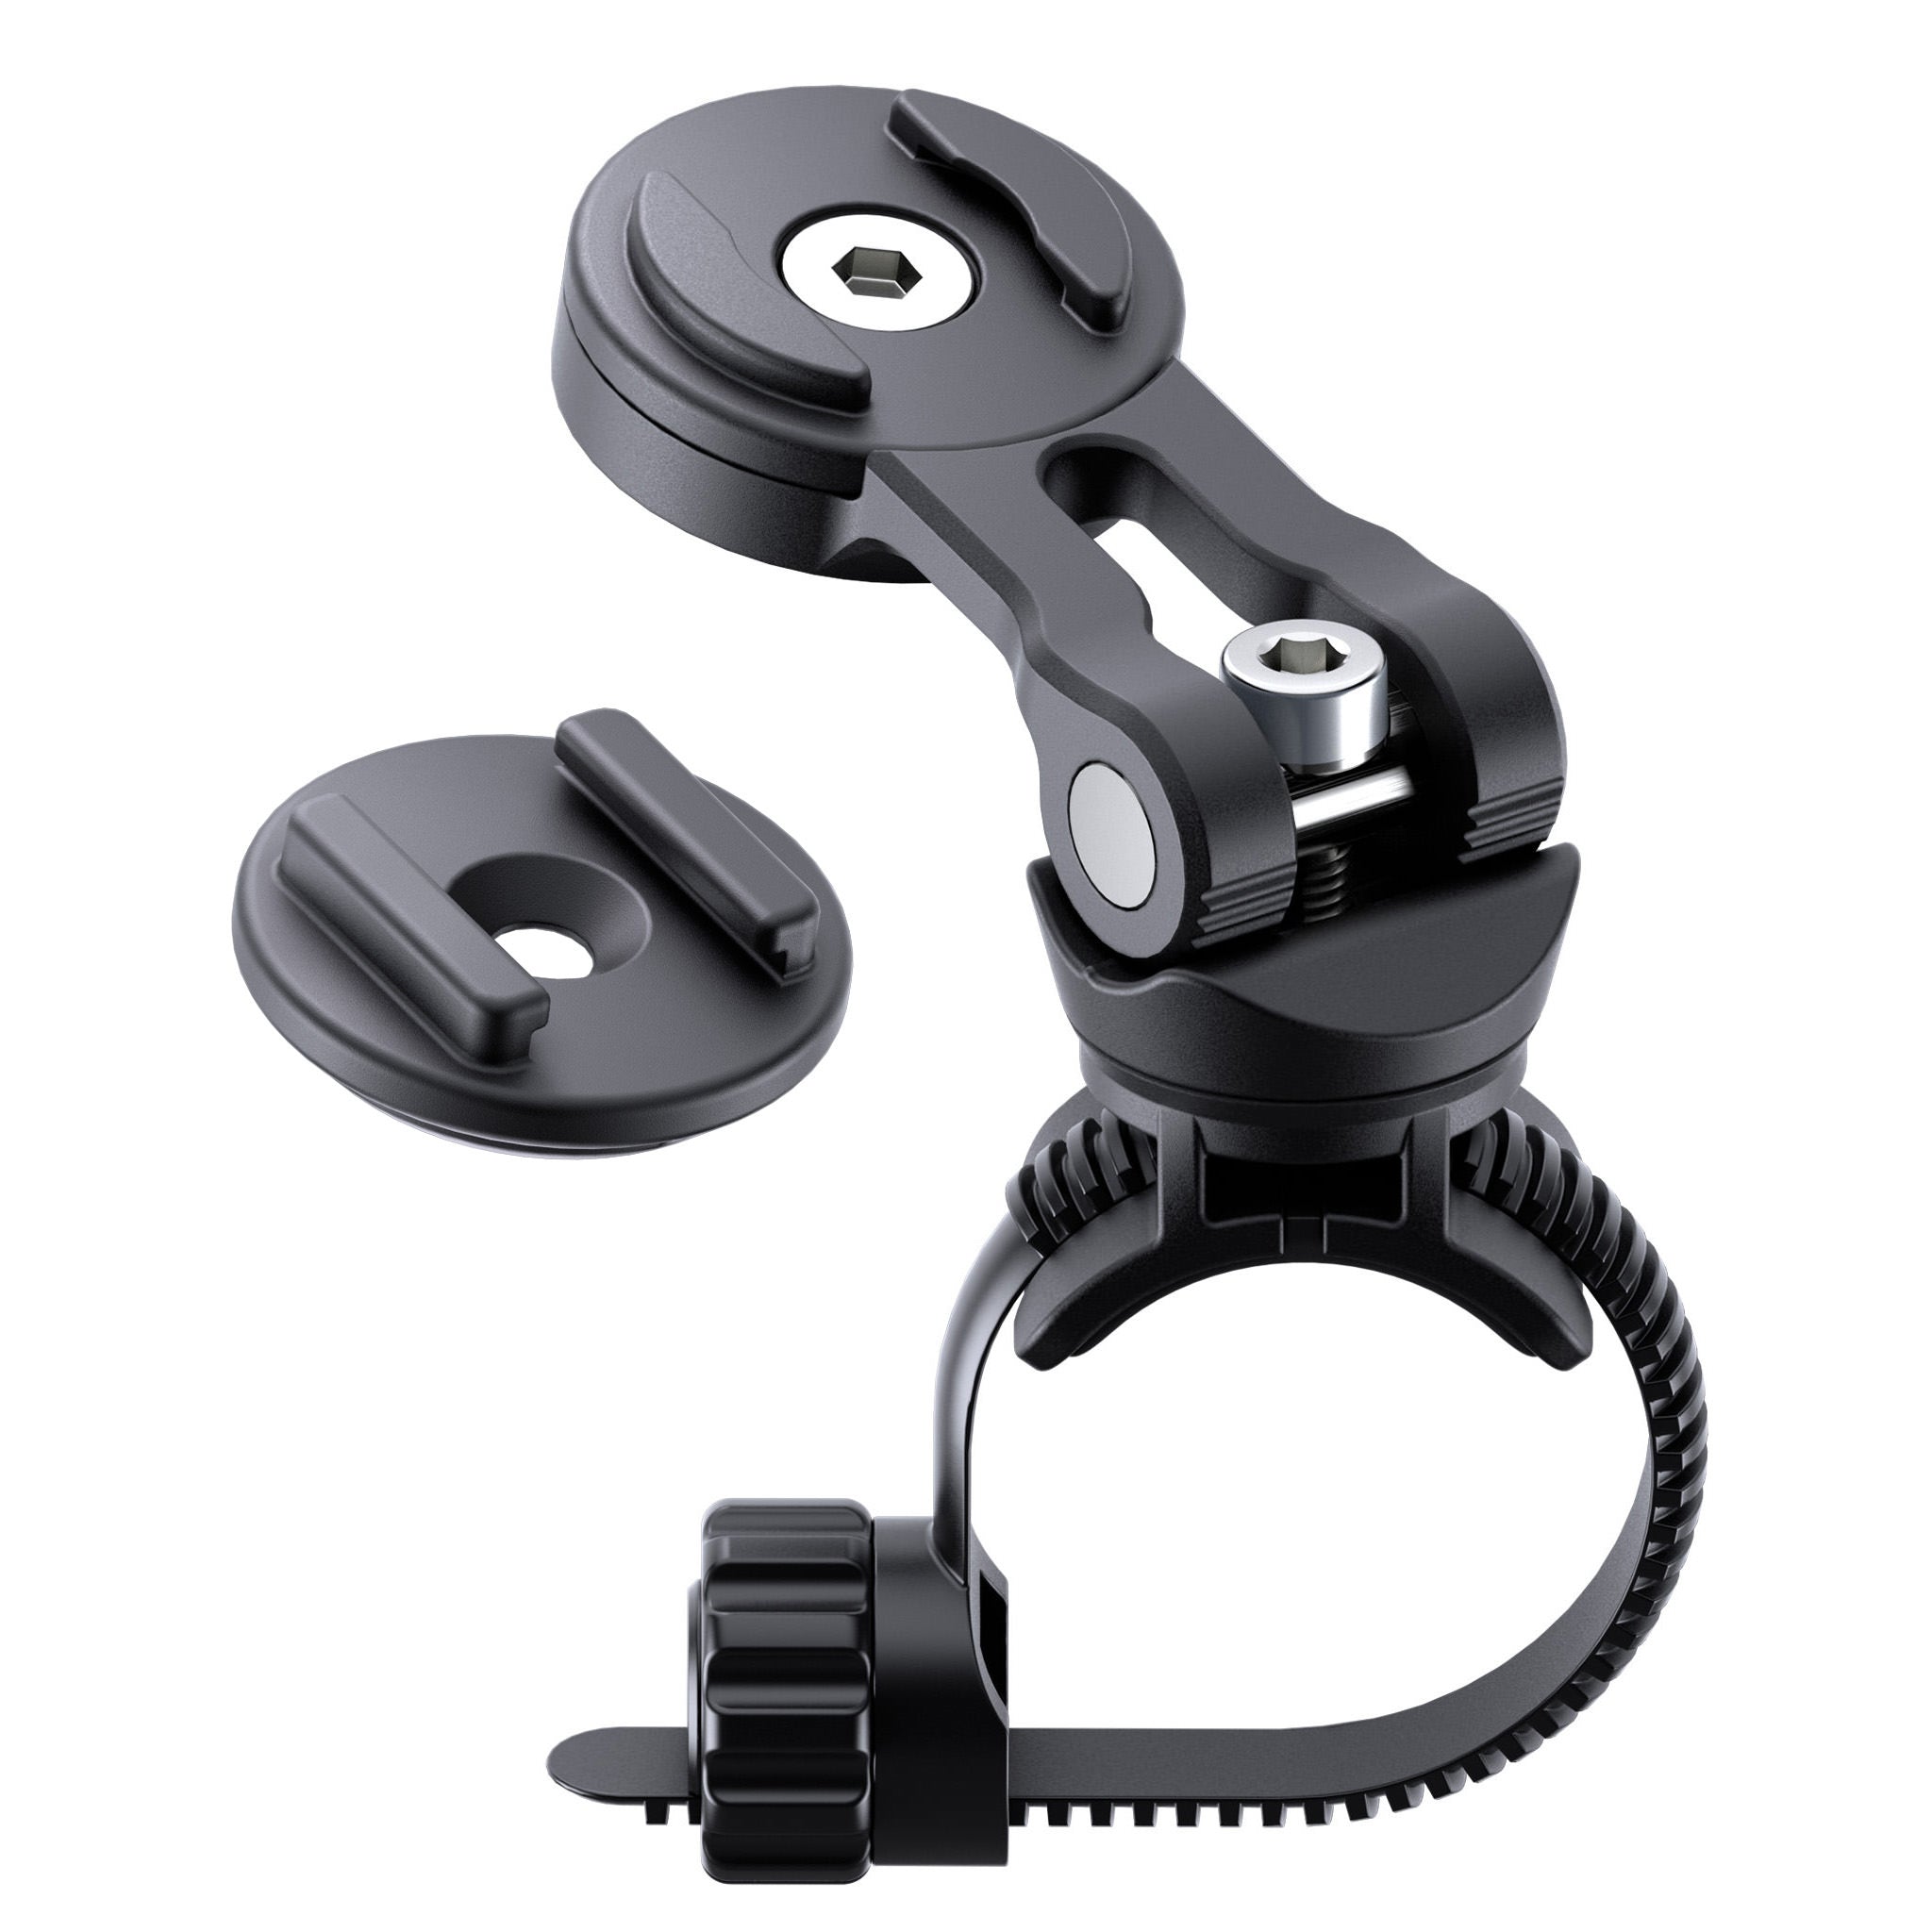 Quad Lock Out Front Bike Mount for iPhone and Samsung Galaxy Phones